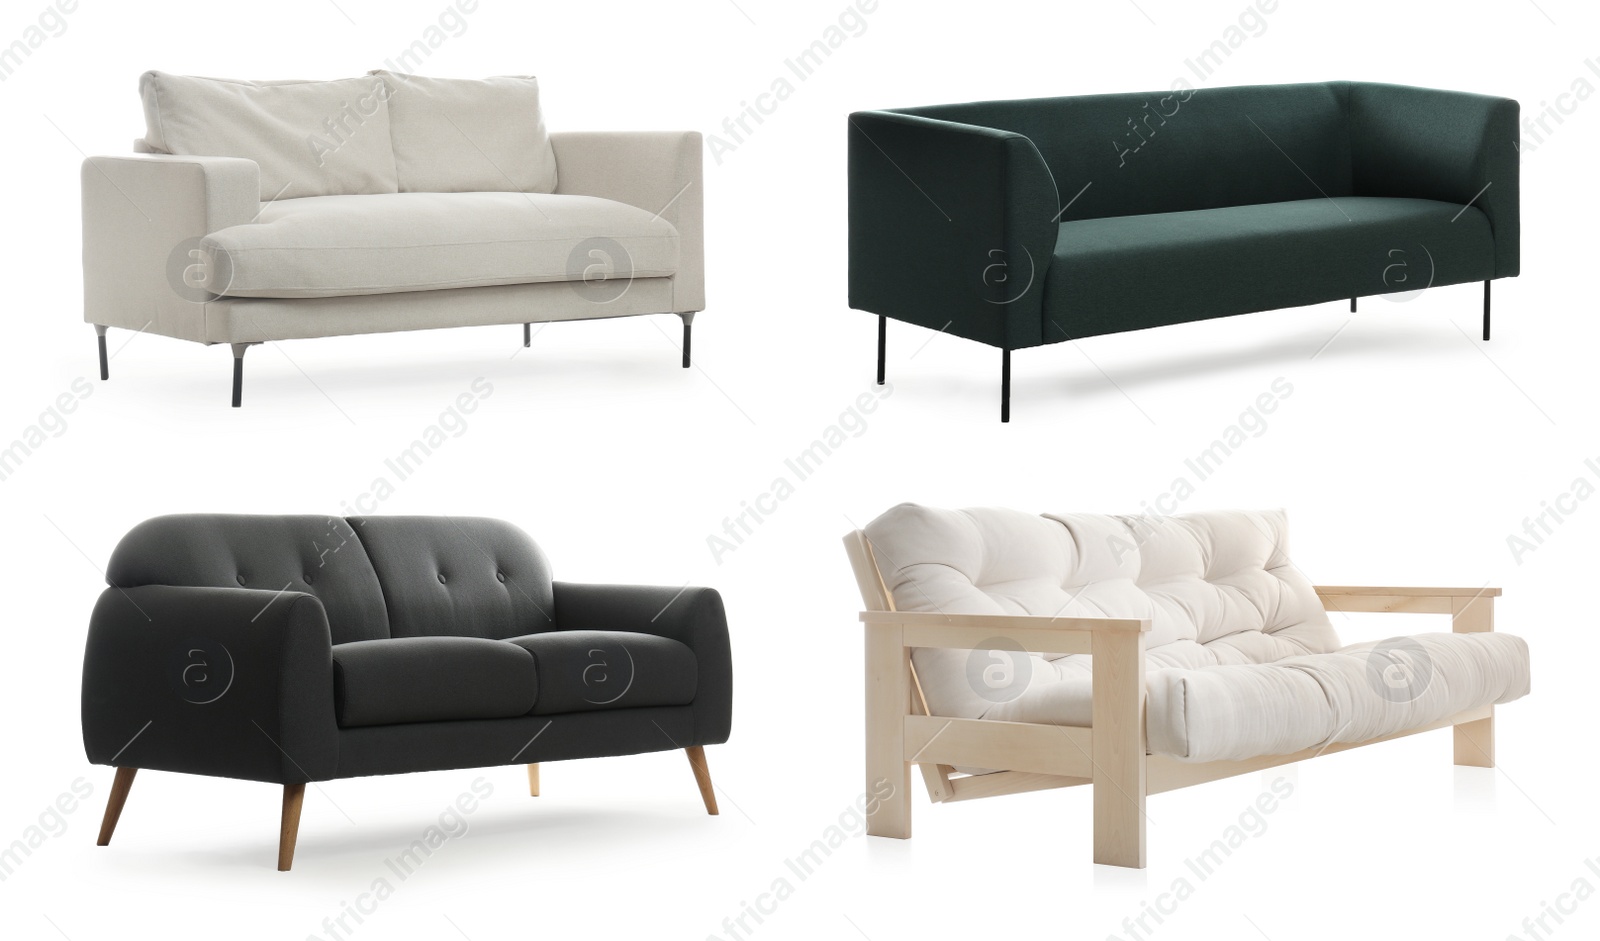 Image of Different stylish comfortable sofas on white background, collage